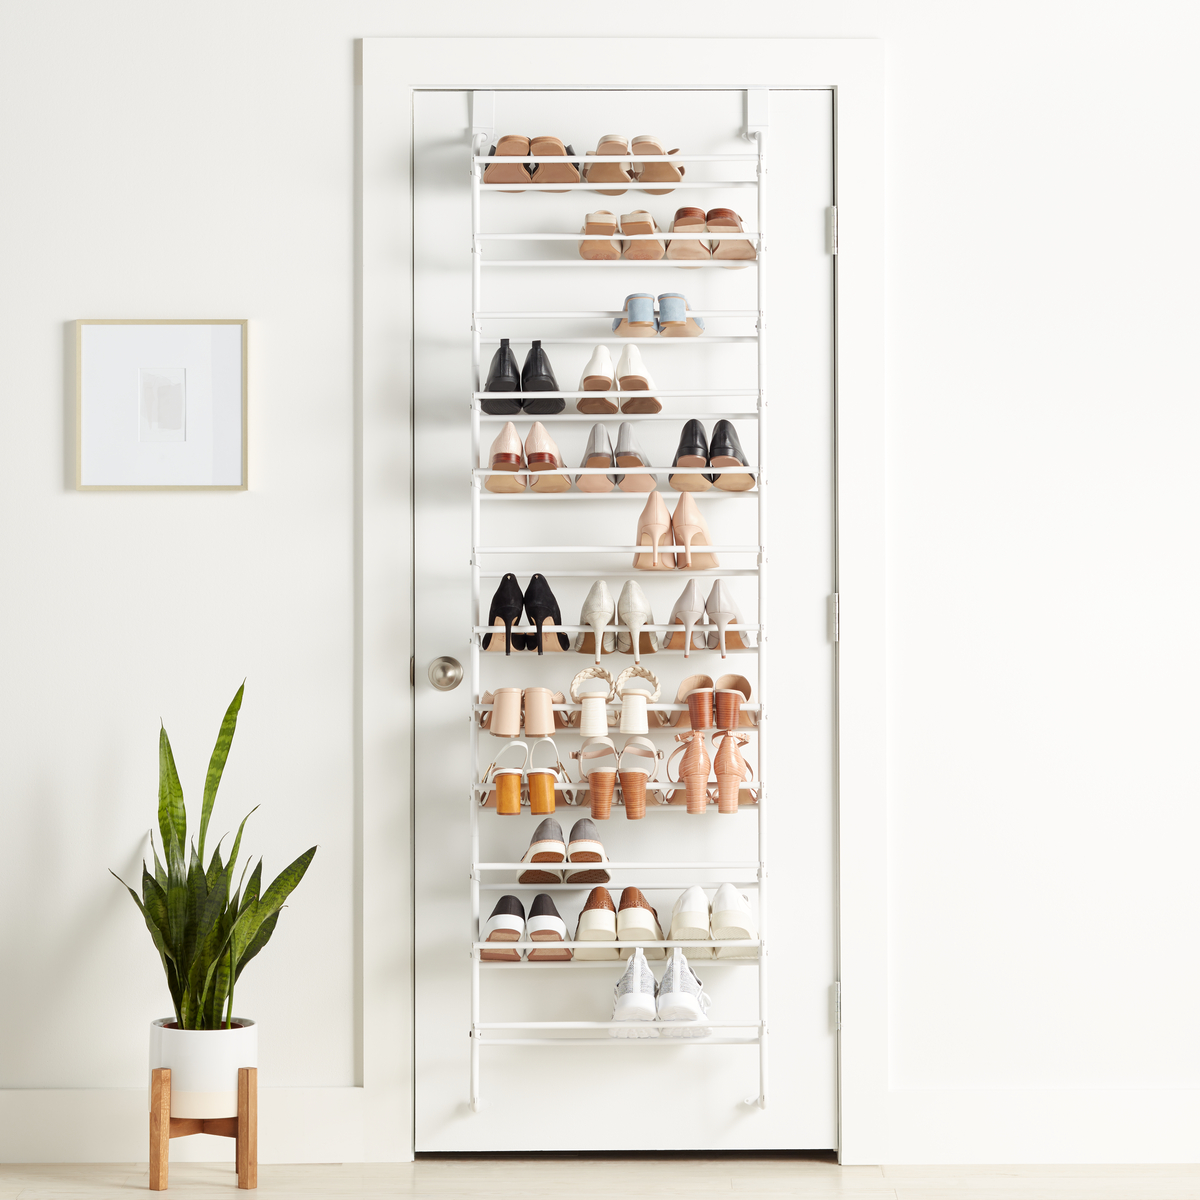 https://www.containerstore.com/catalogimages/438248/10084724-36-pair-white-shoe-rack.jpg